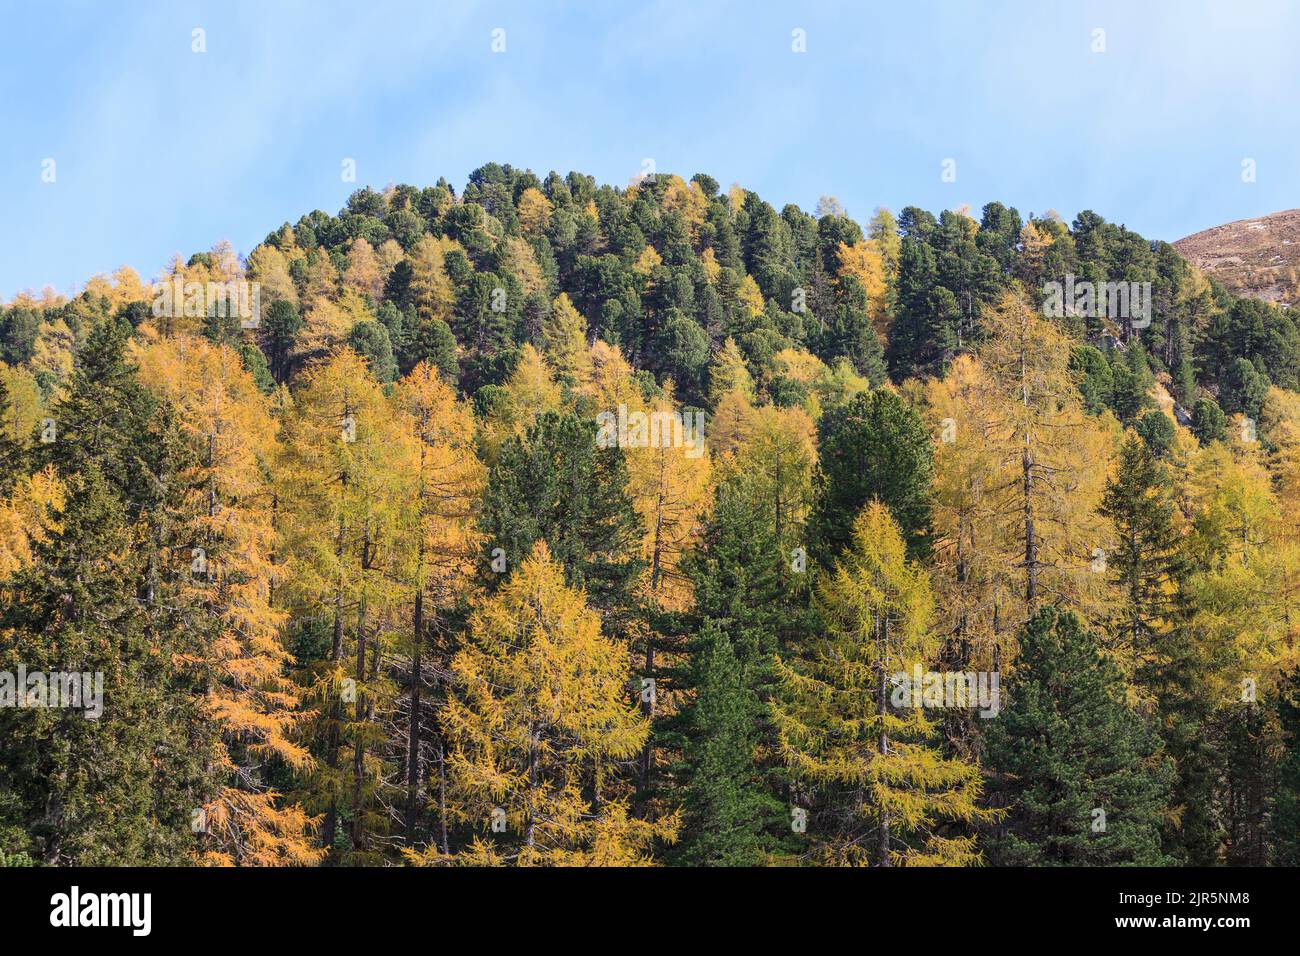 Larch tree forest in the Alp landscape Stock Photo